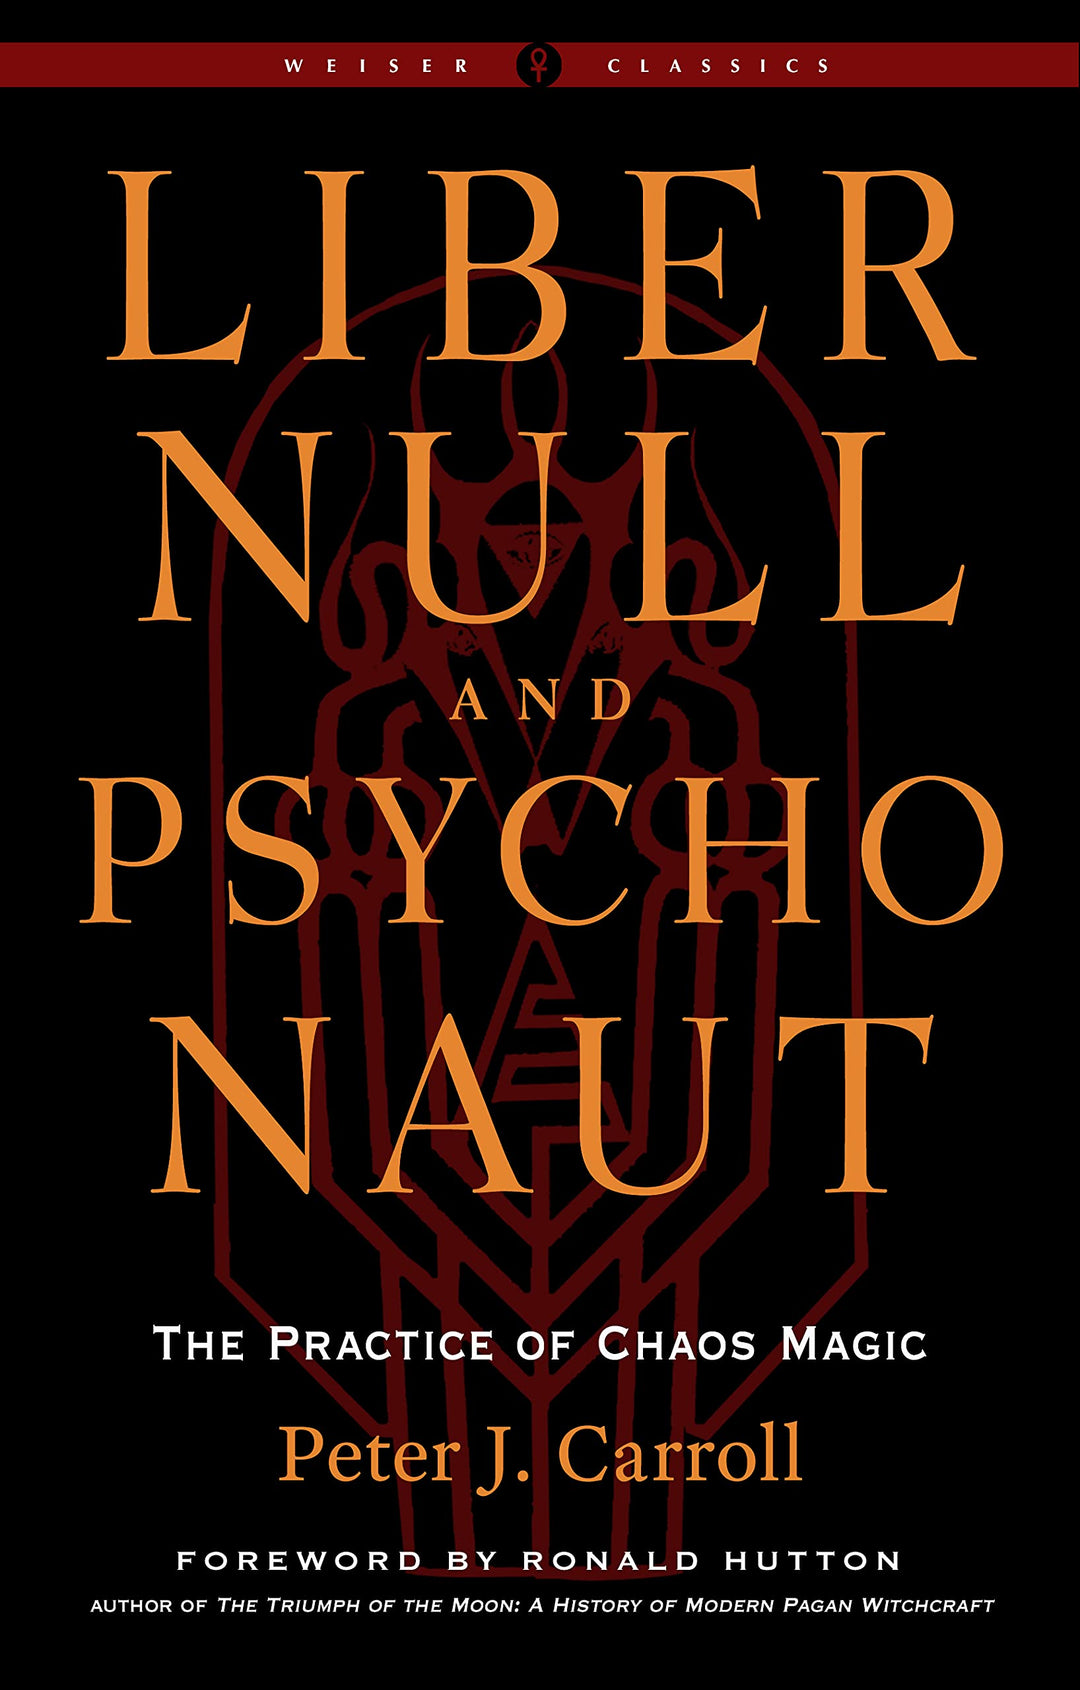 Liber Null & Psychonaut: The Practice of Chaos Magic (Revised and Expanded Edition) (Weiser Classics Series)